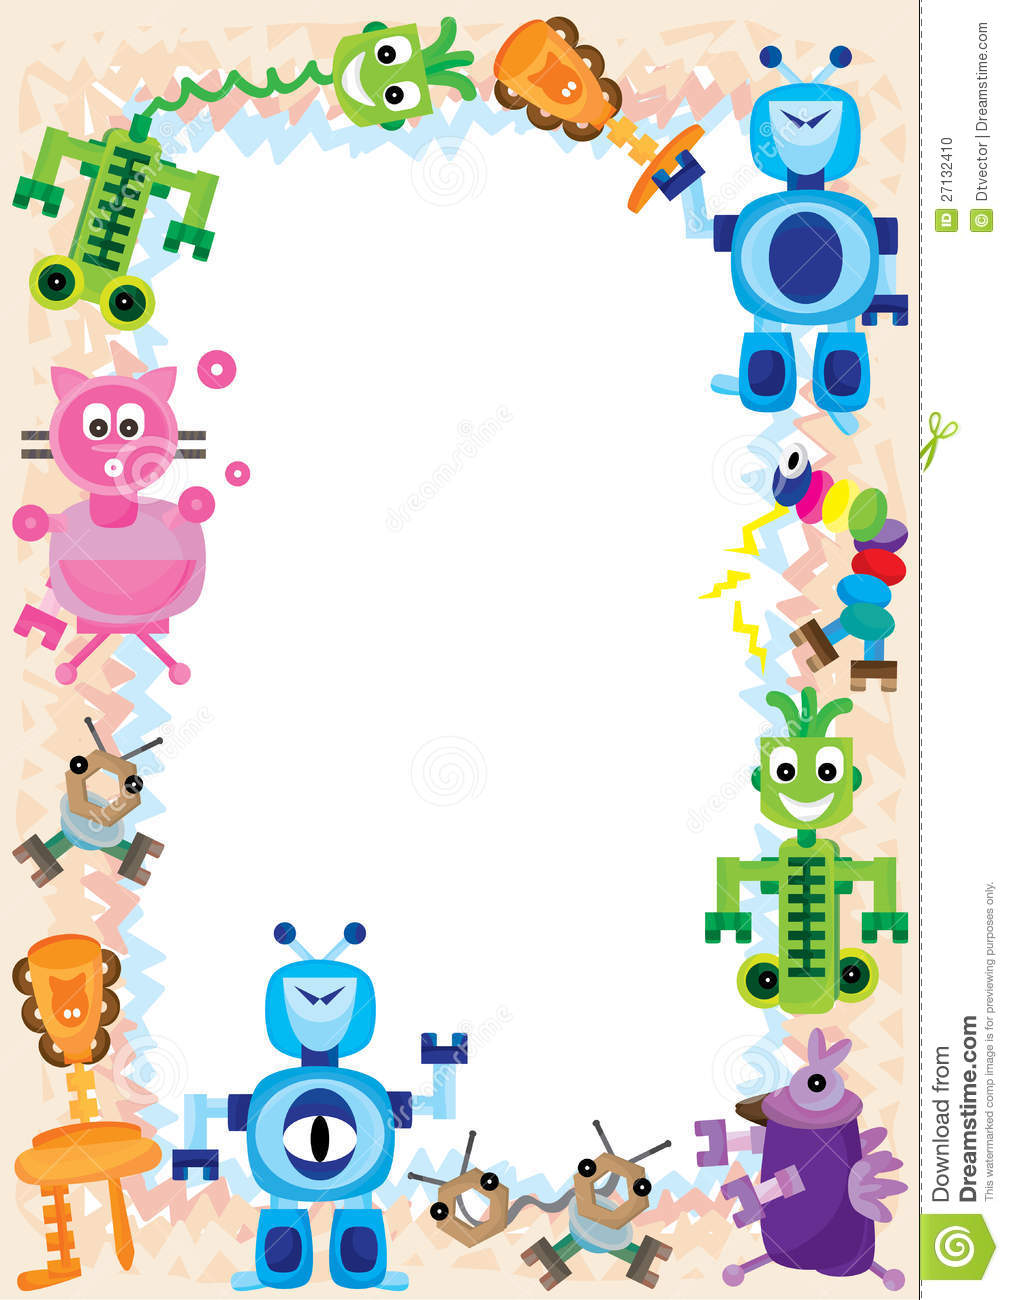 Illustration Of Robot Family Playing Together Frame On White